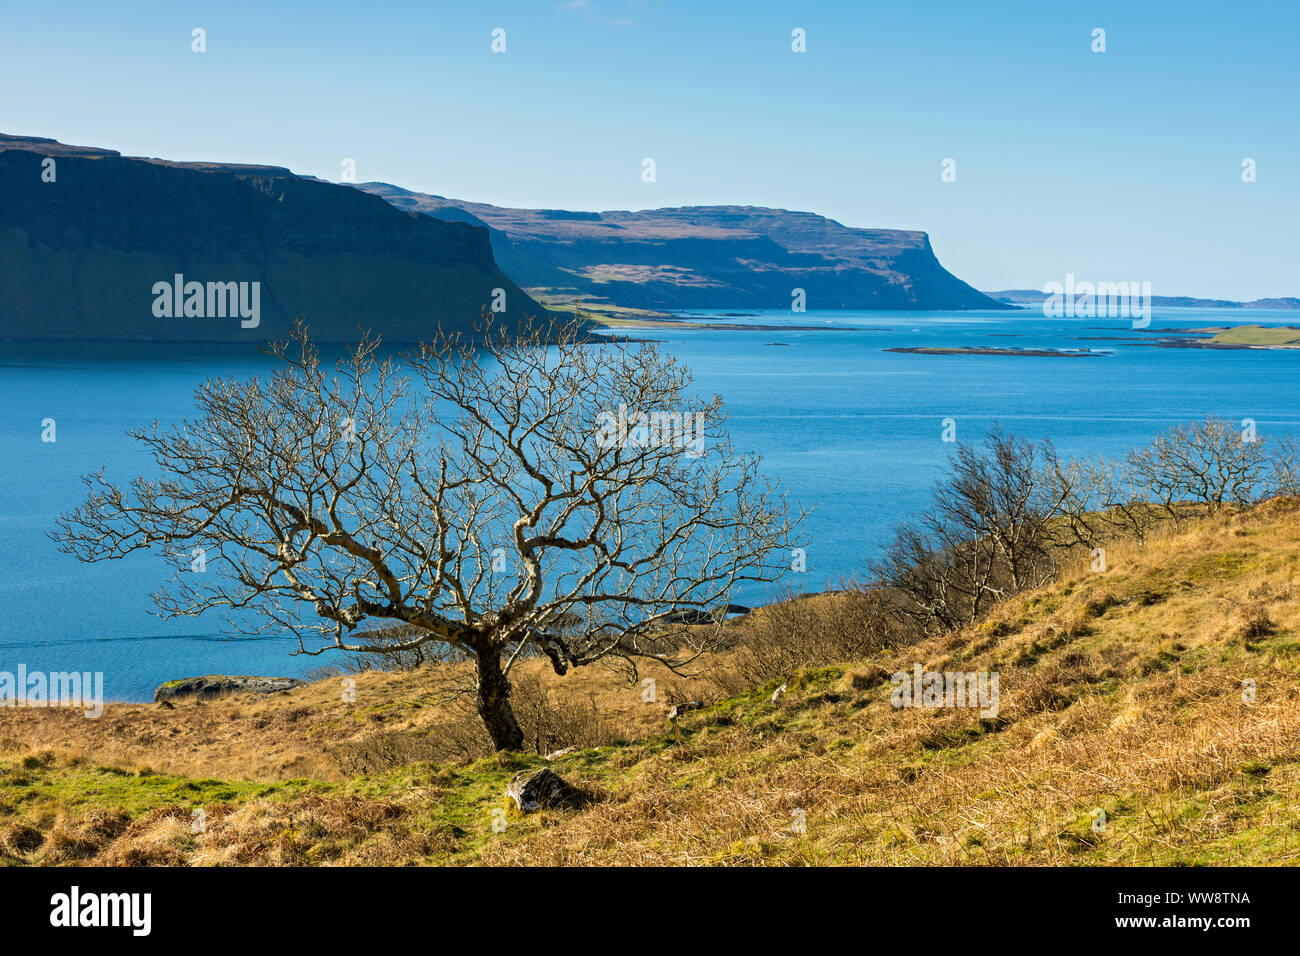 The cliffs of Creag Mhòr over Loch na Keal, Isle of Mull, Scotland, UK Stock Photo